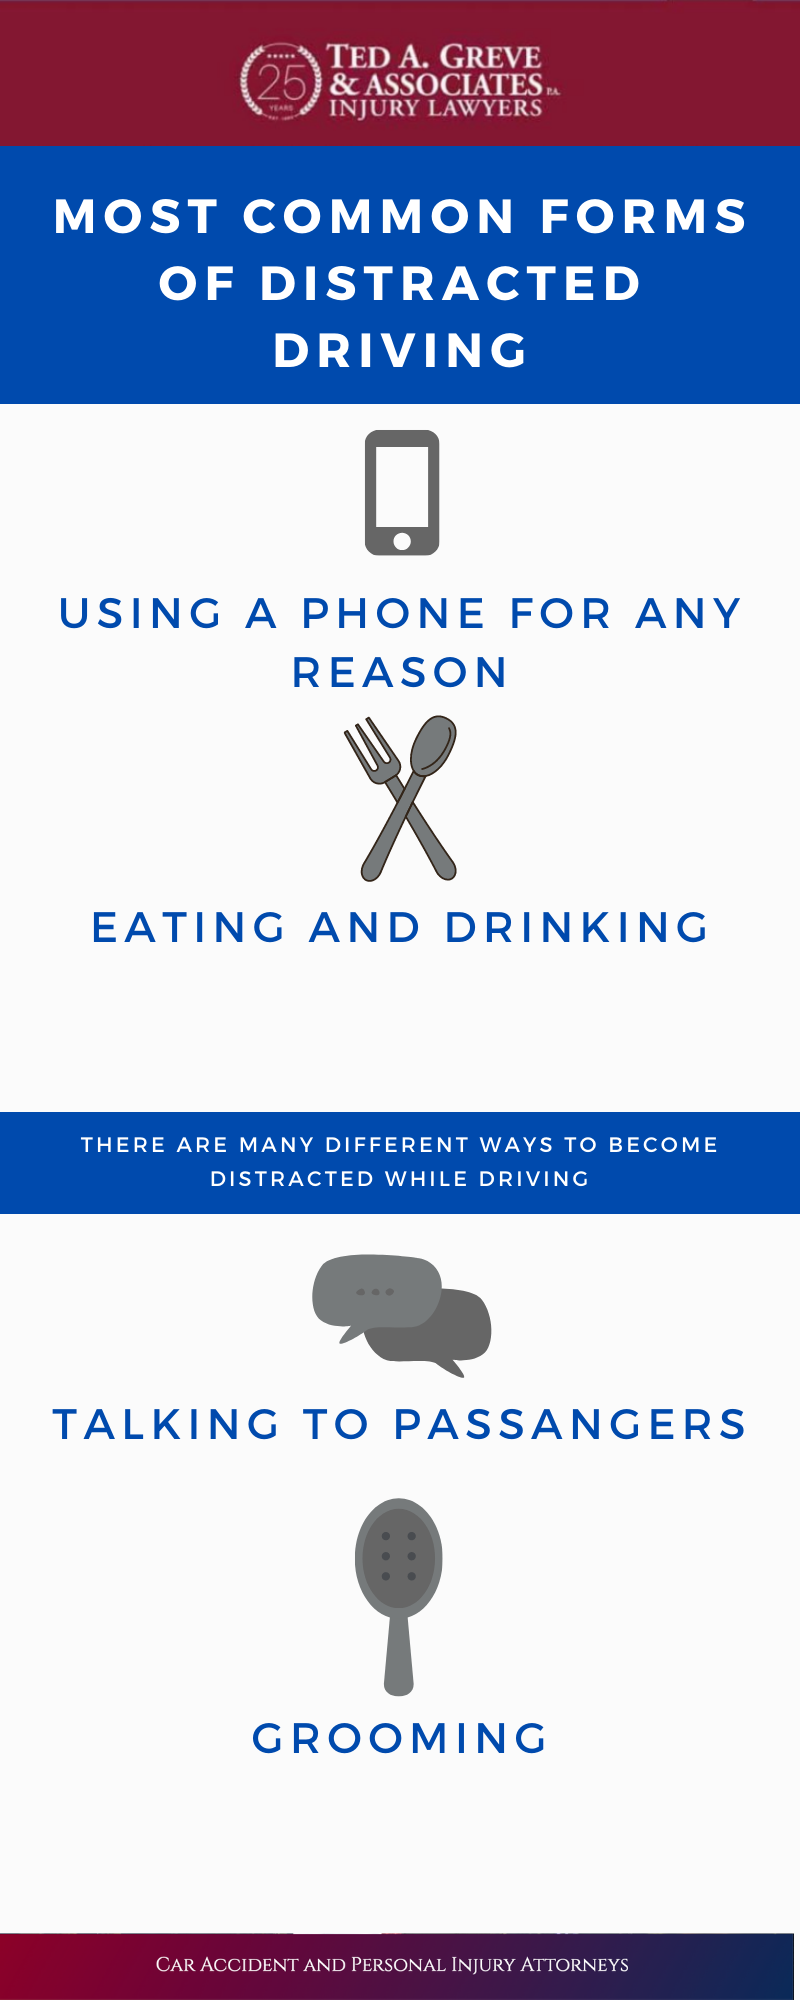 Ted Greve Atlanta Distracted Driving Accident Infographic